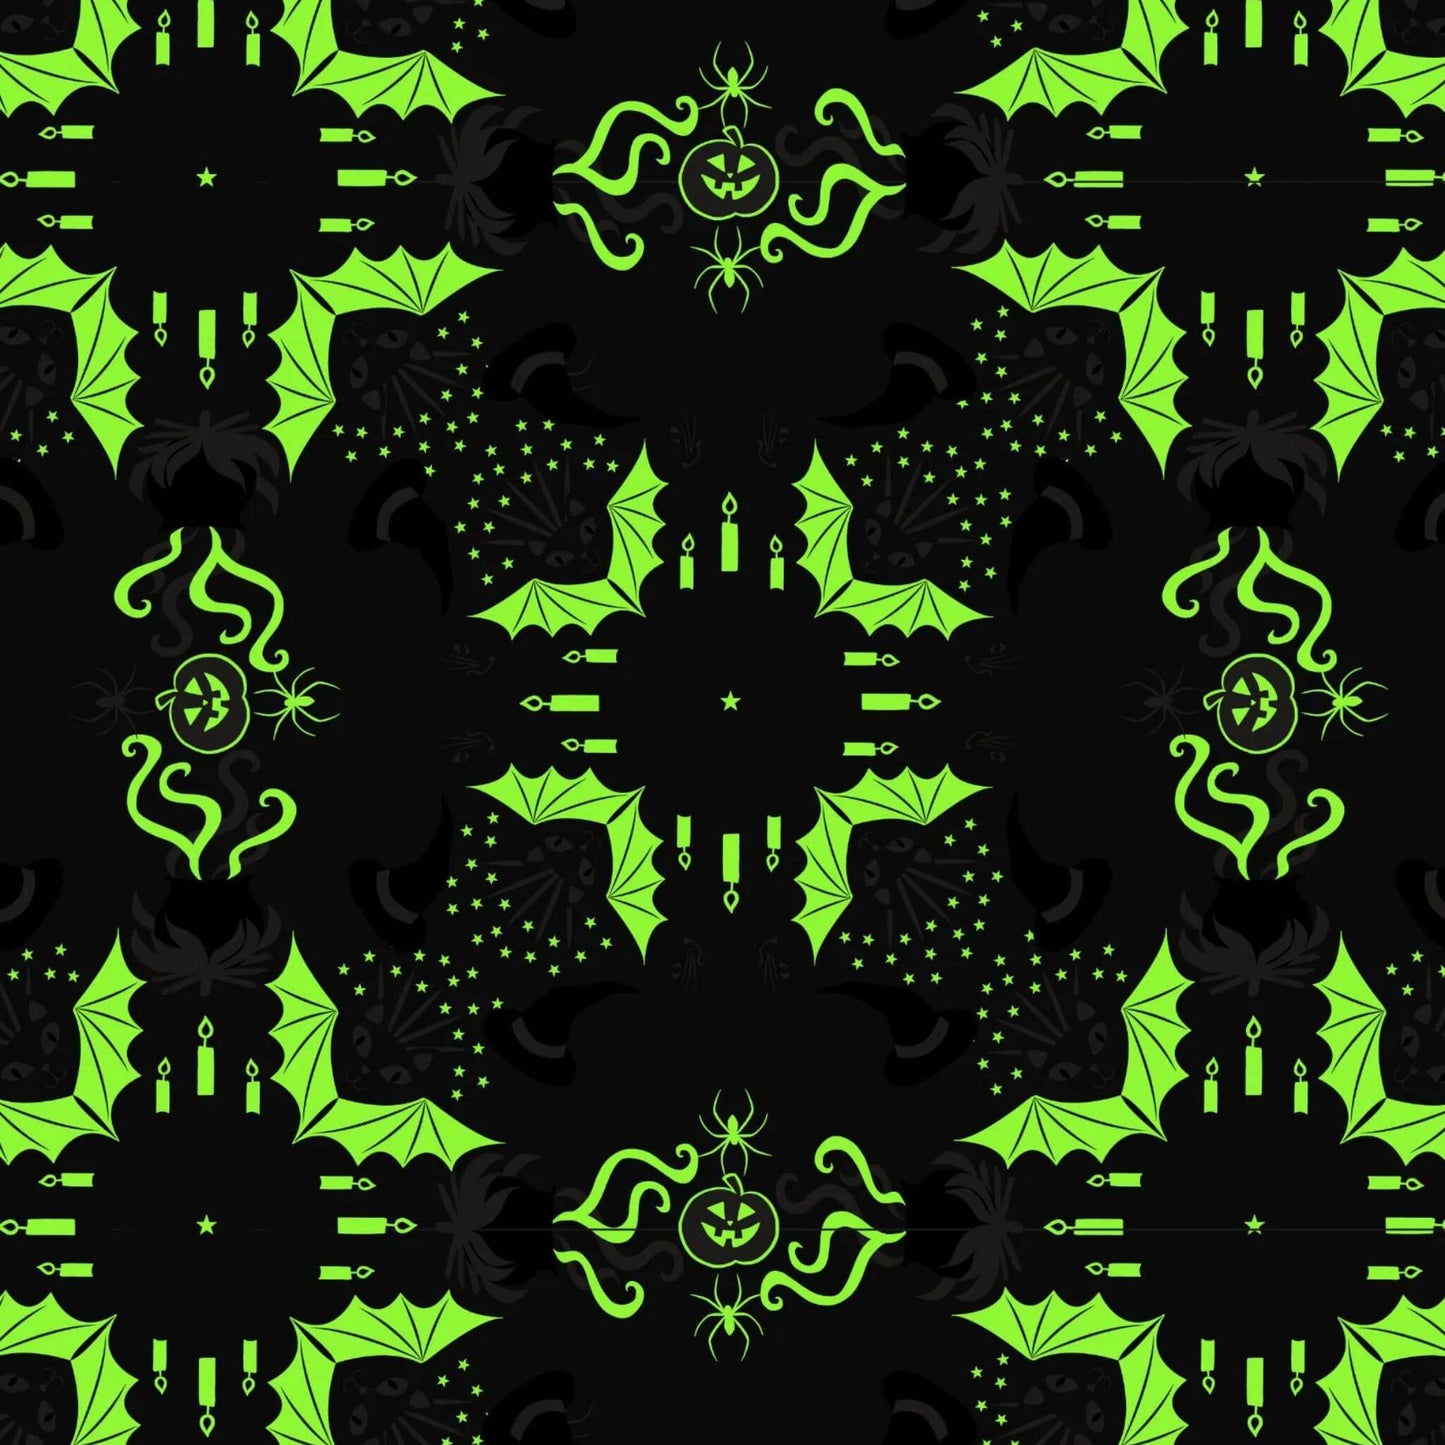 Hats, Cats and Bats - Haunted House Halloween Fabric Range - Lewis and Irene - Spooky Blue